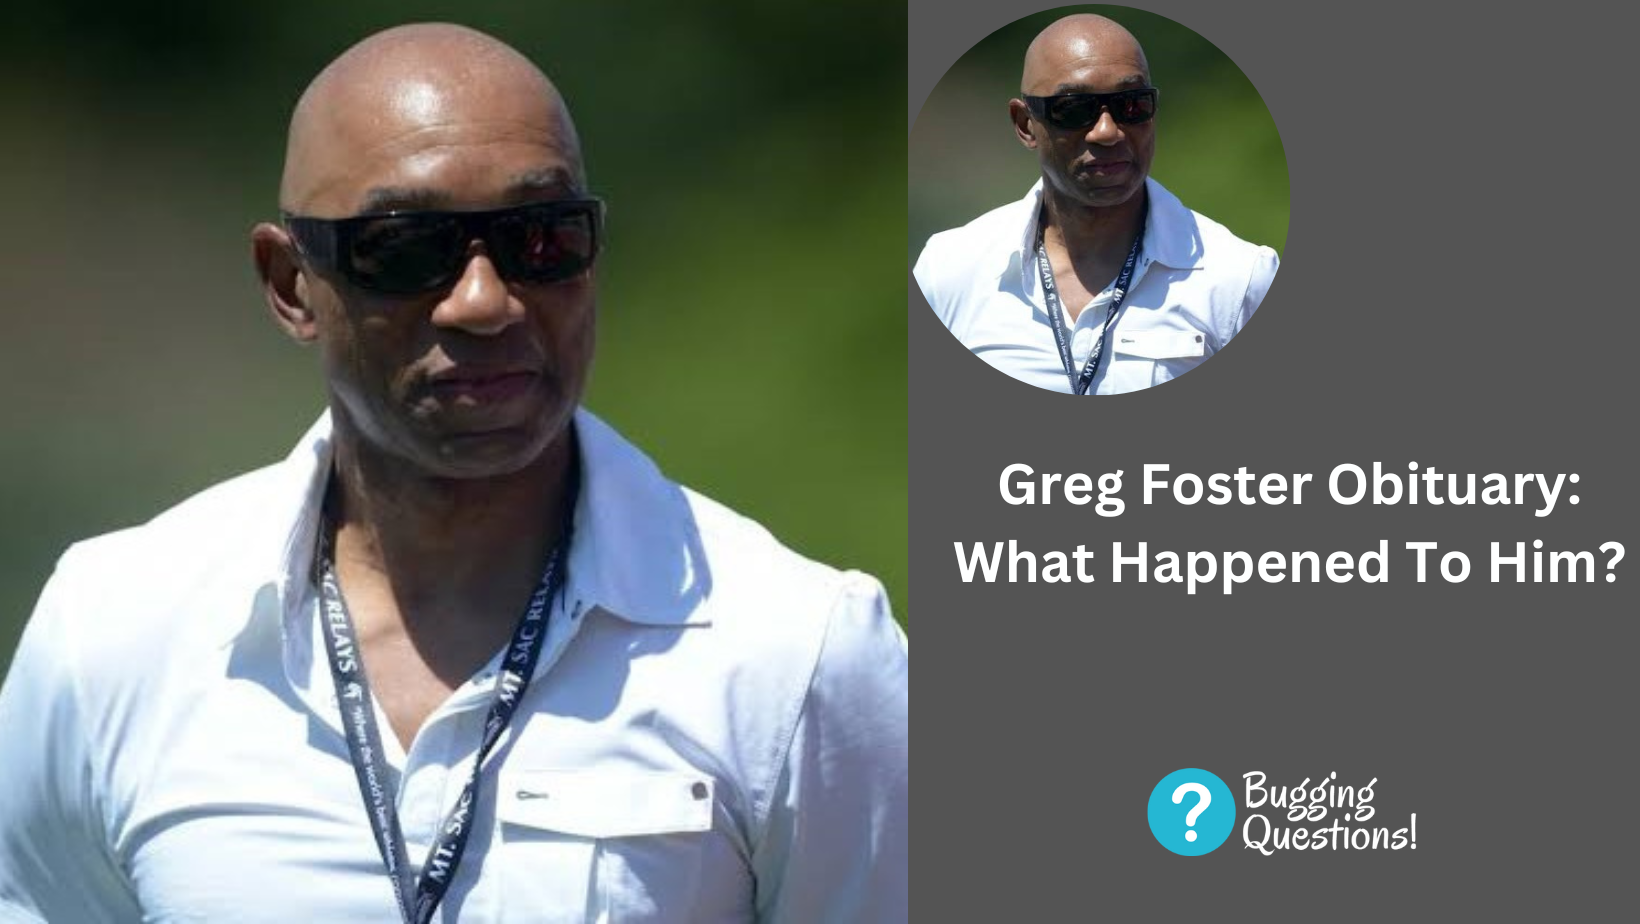 Greg Foster Obituary: What Happened To Him?